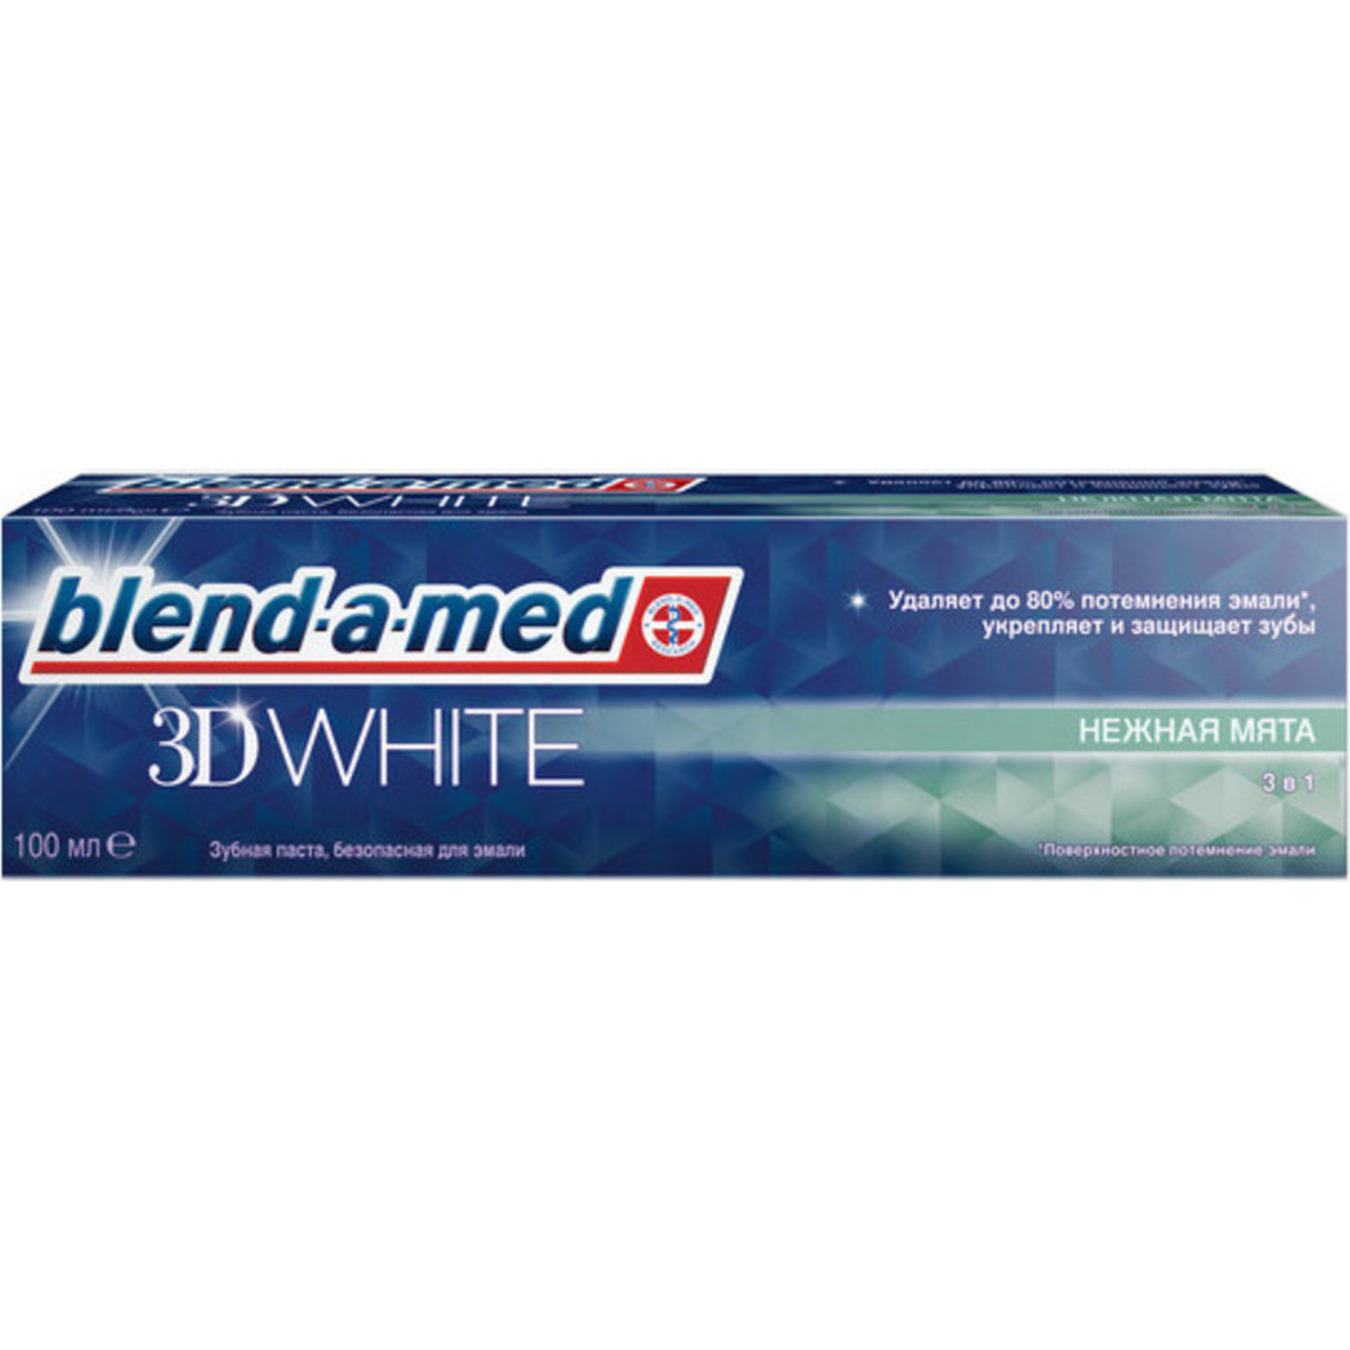 Blend-a-med 3D White Gentle Mint Toothpaste 100ml